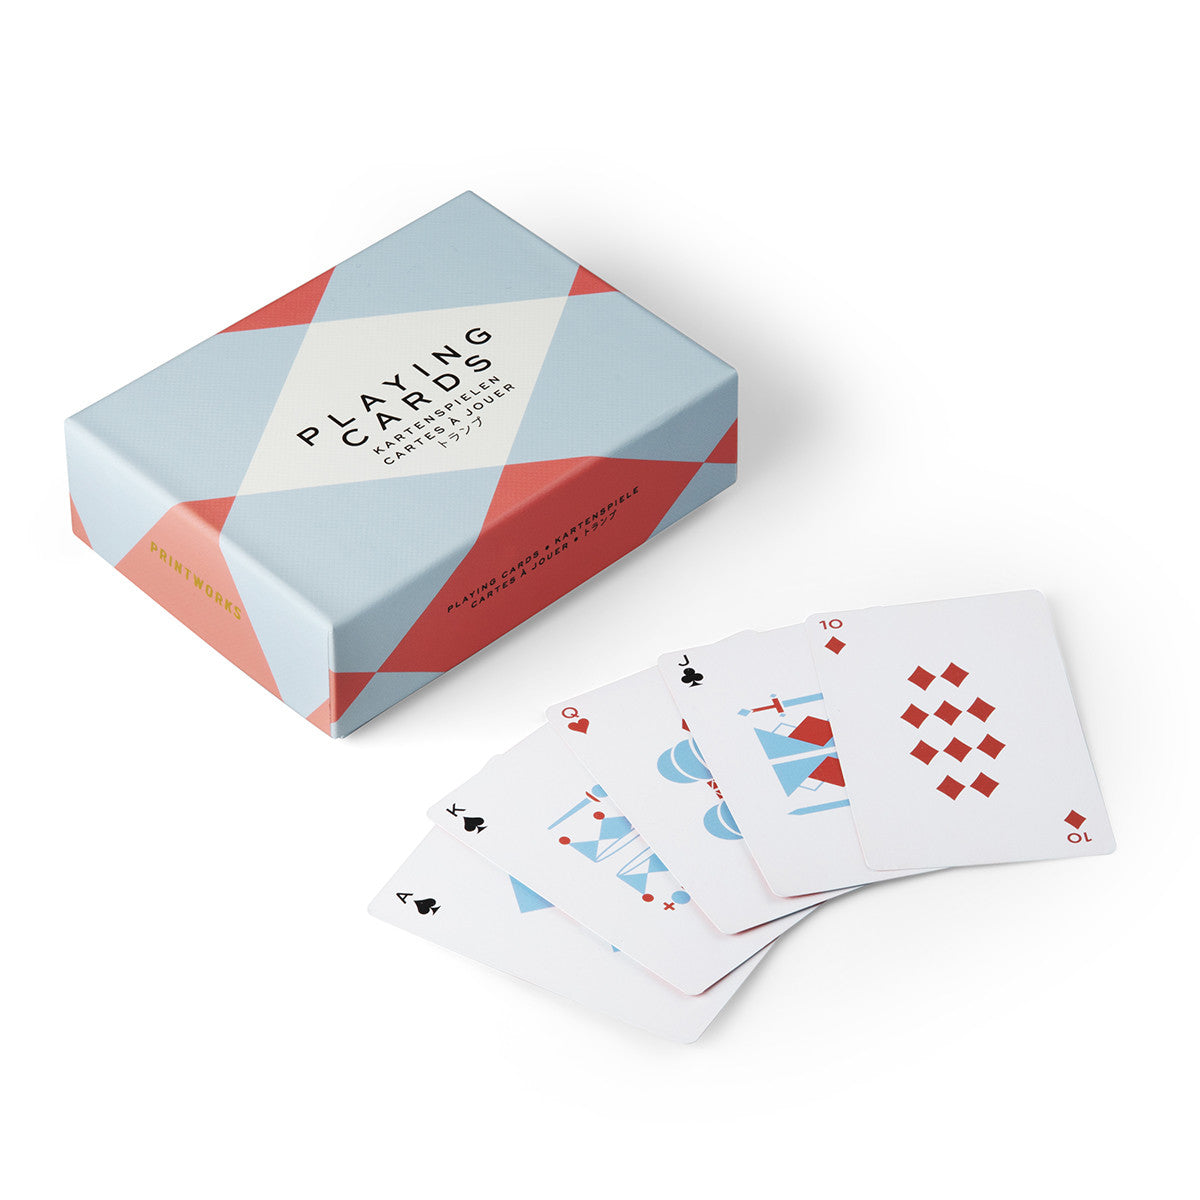 Playing Cards by Printworks